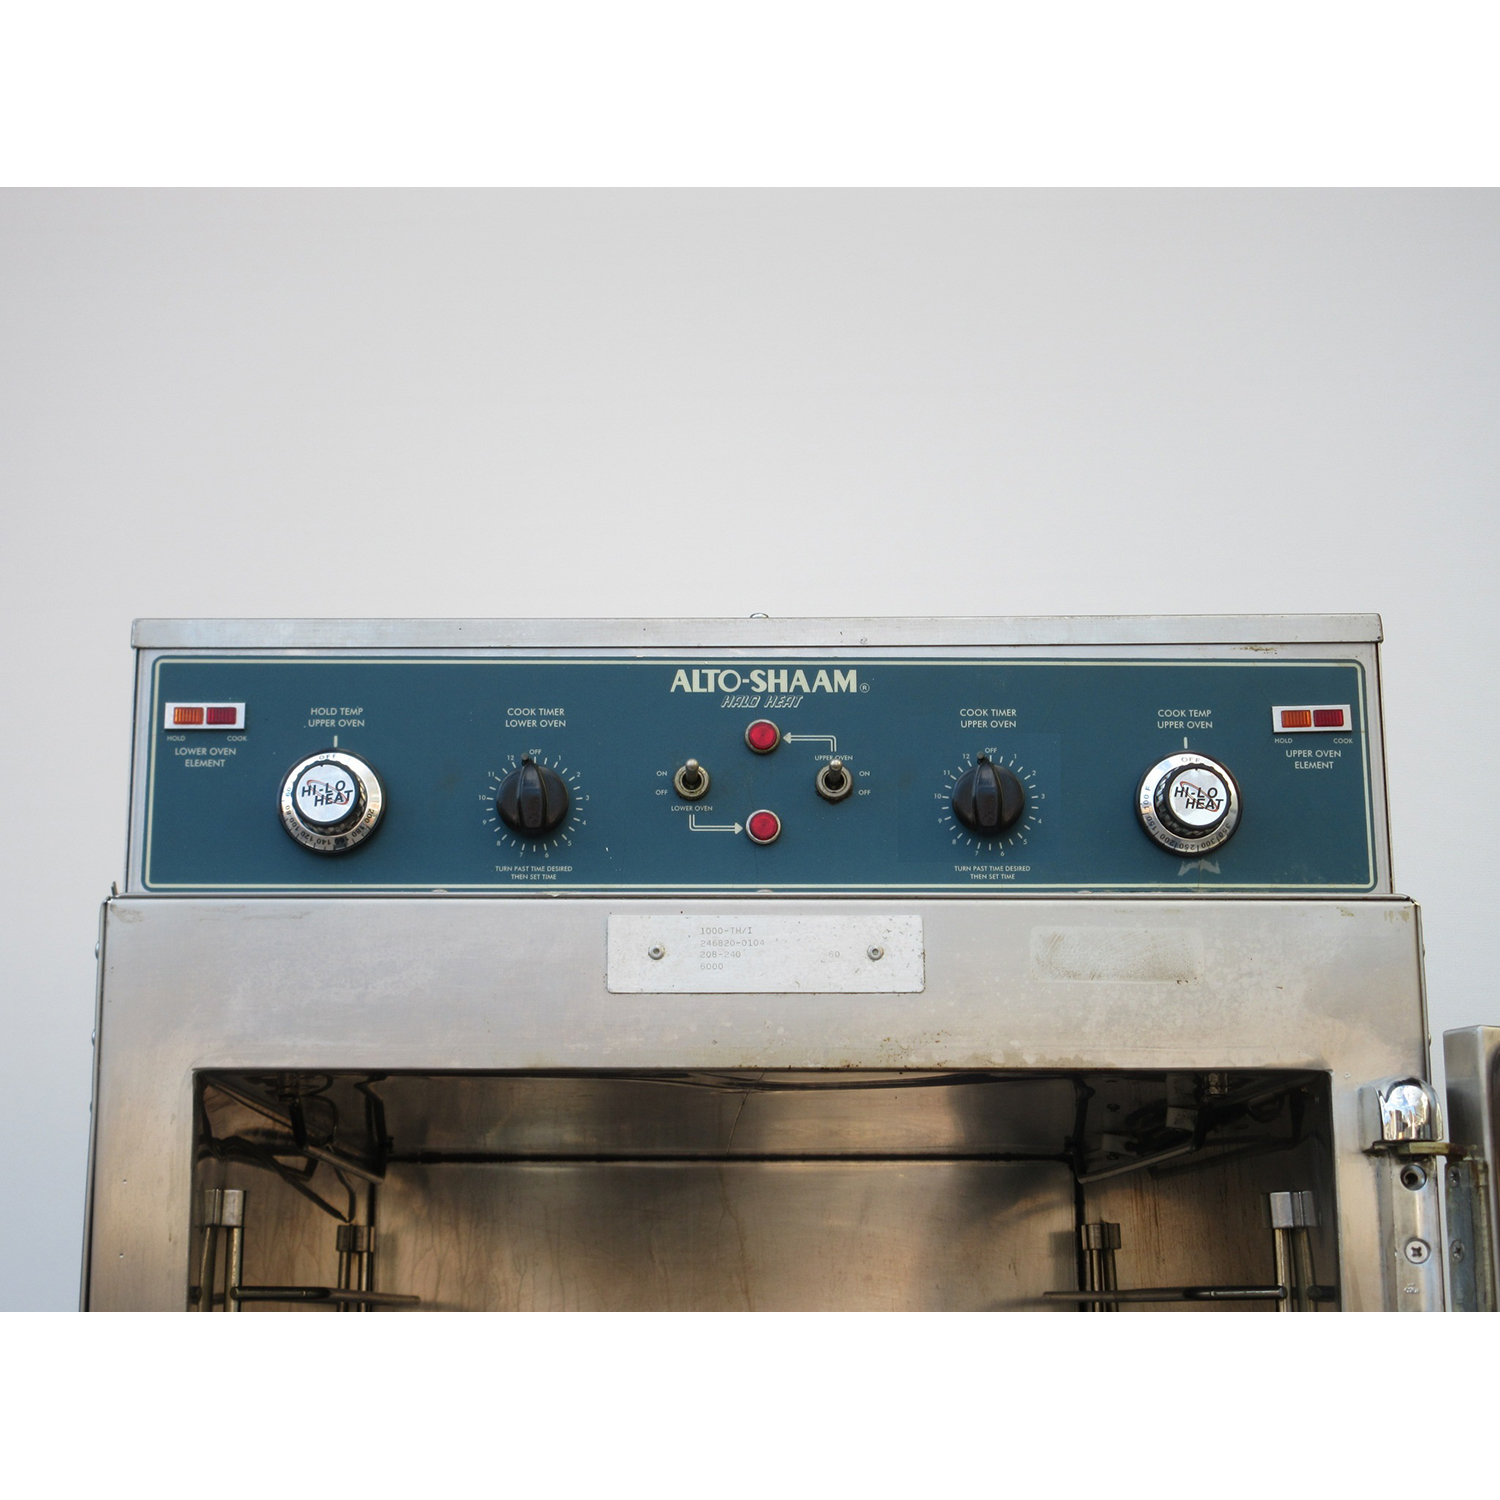 Alto Shaam 1000-TH-I Cook & Hold Oven, Used Excellent Condition image 2